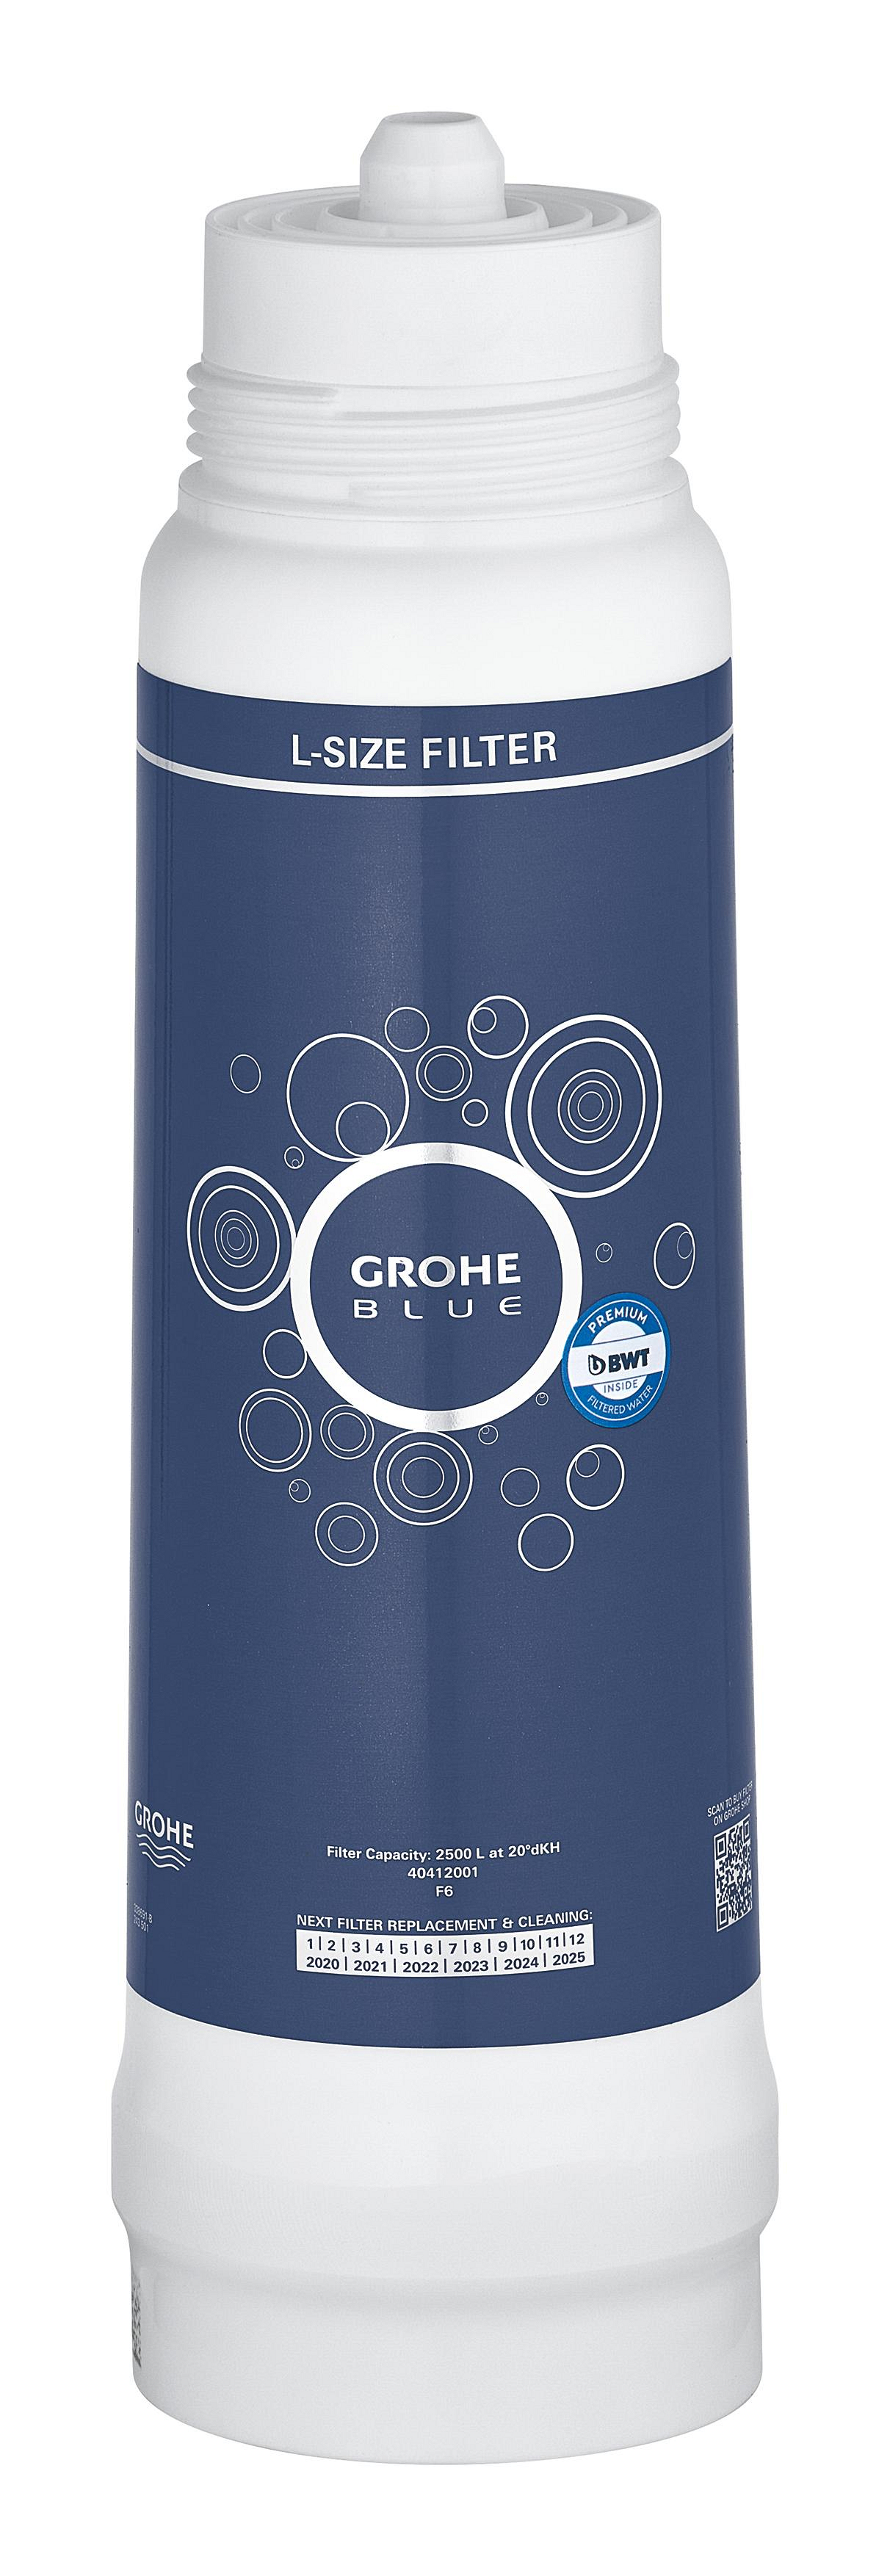 GROHE Blue Filter L-Size 2500L